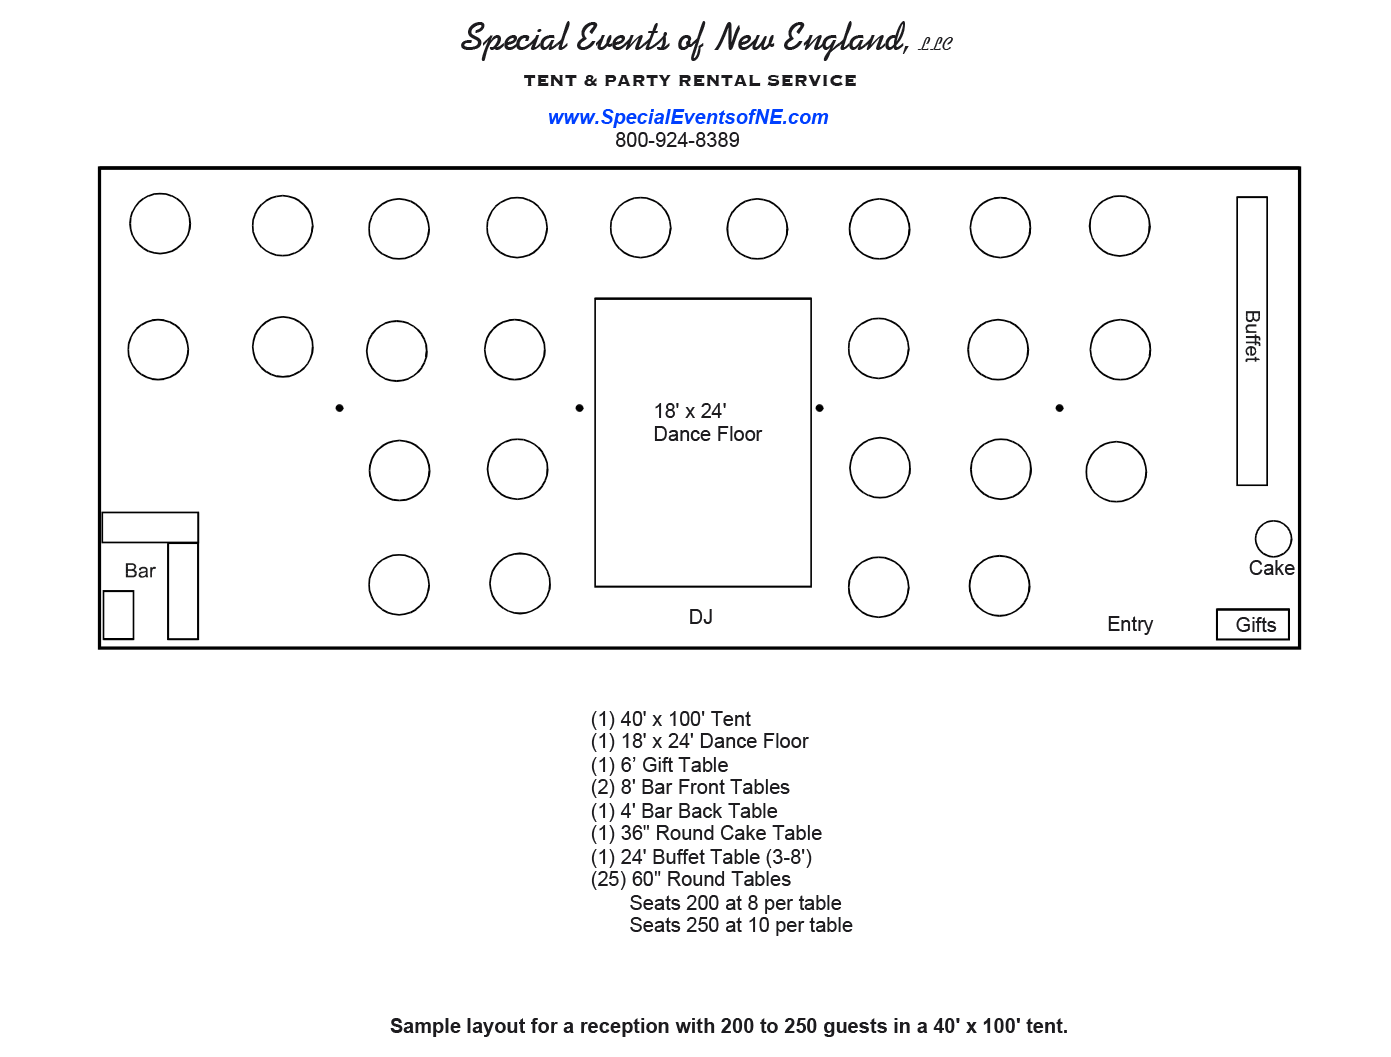 Tent Layout Options Get The Right, How Many Tables For 200 Guests